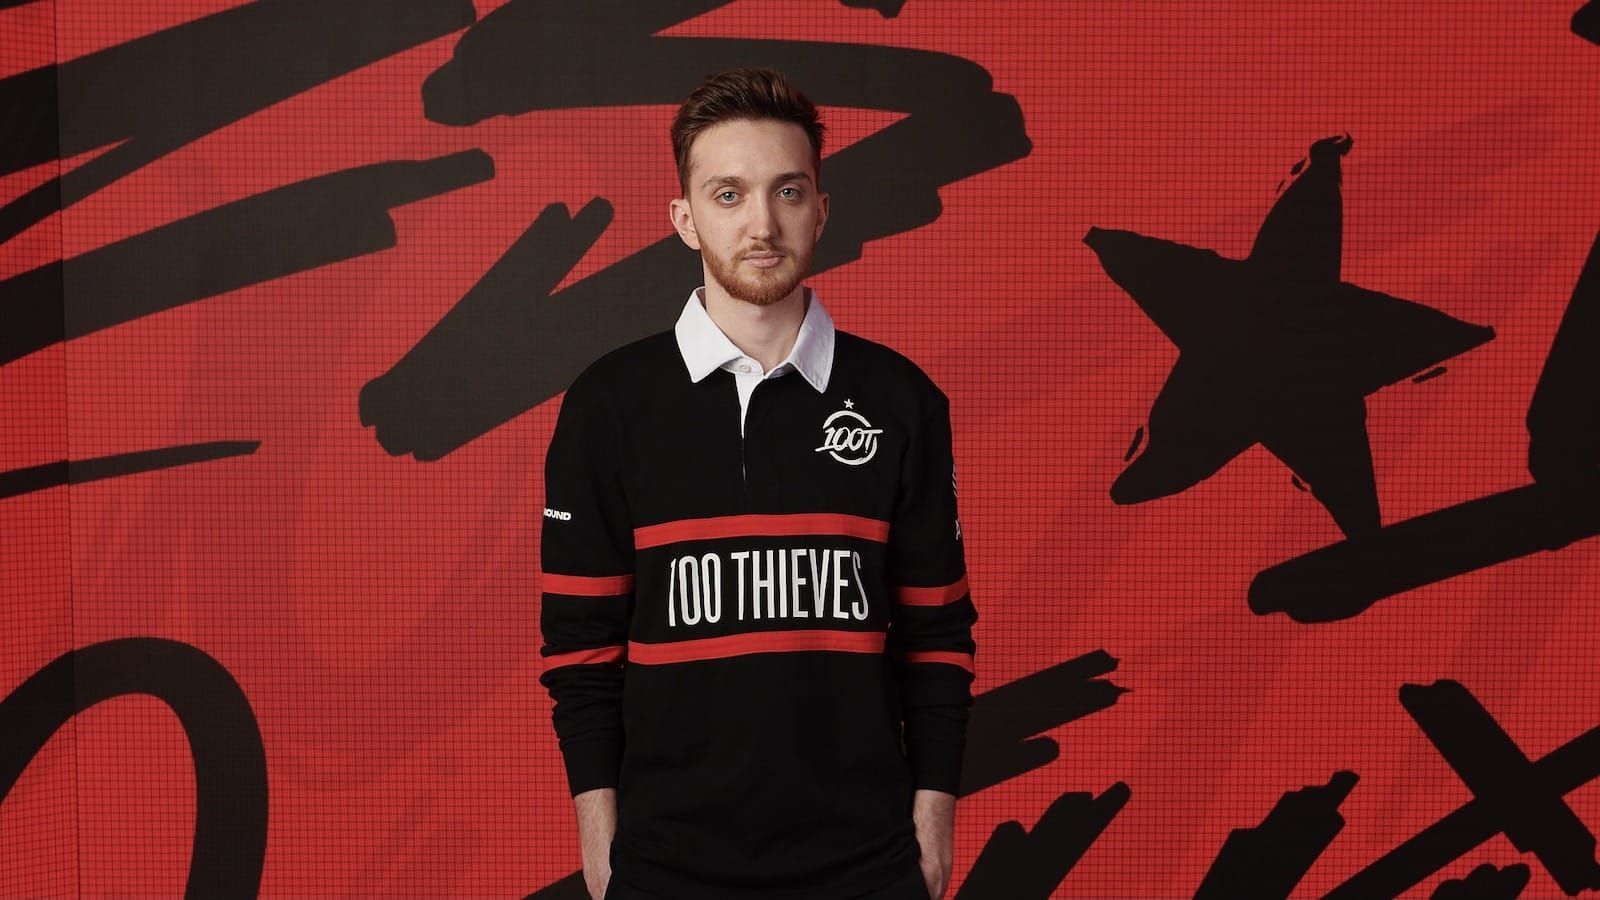 100 thieves player Closer stands in front of a red and black background wearing the team's new rugby-style 2022 jersey